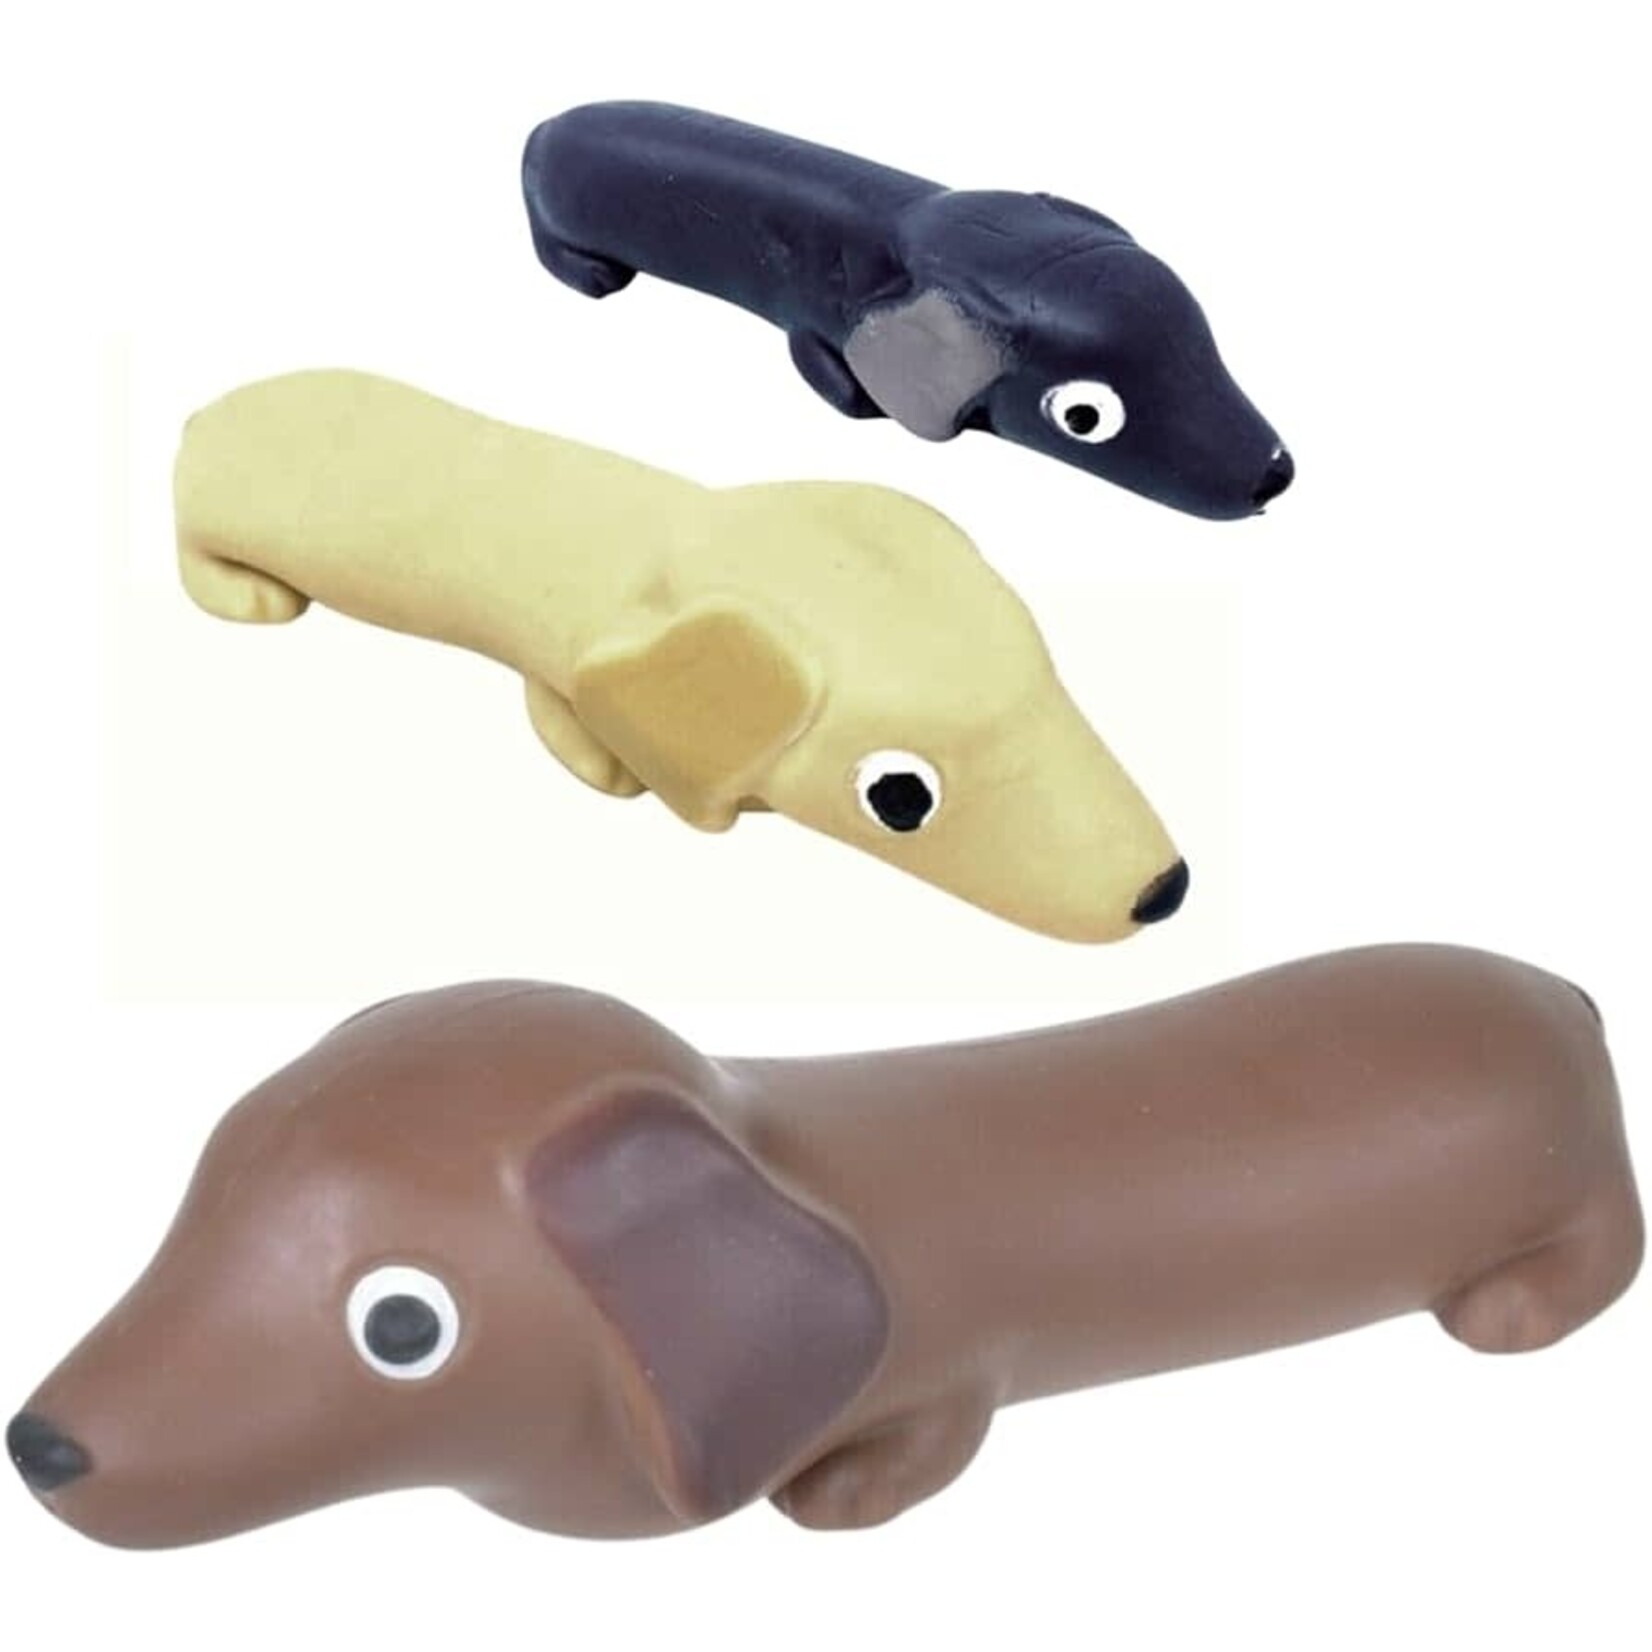 Stretchy Dachshund  - Assorted Colours Sold Separately